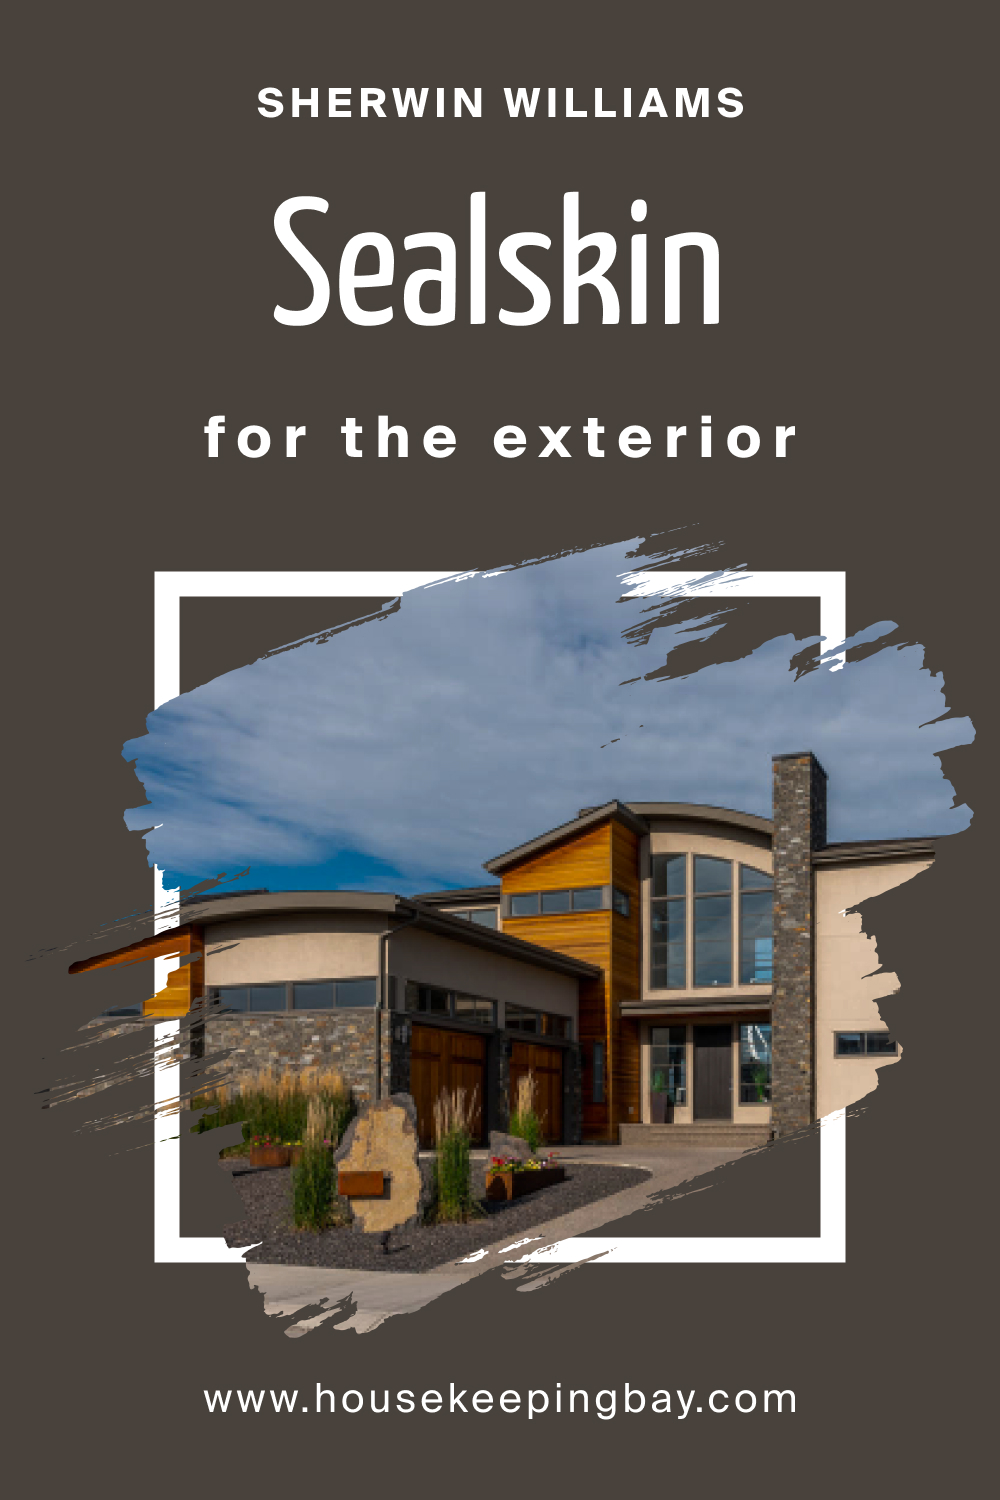 Sherwin Williams. SW 7675 Sealskin For the exterior